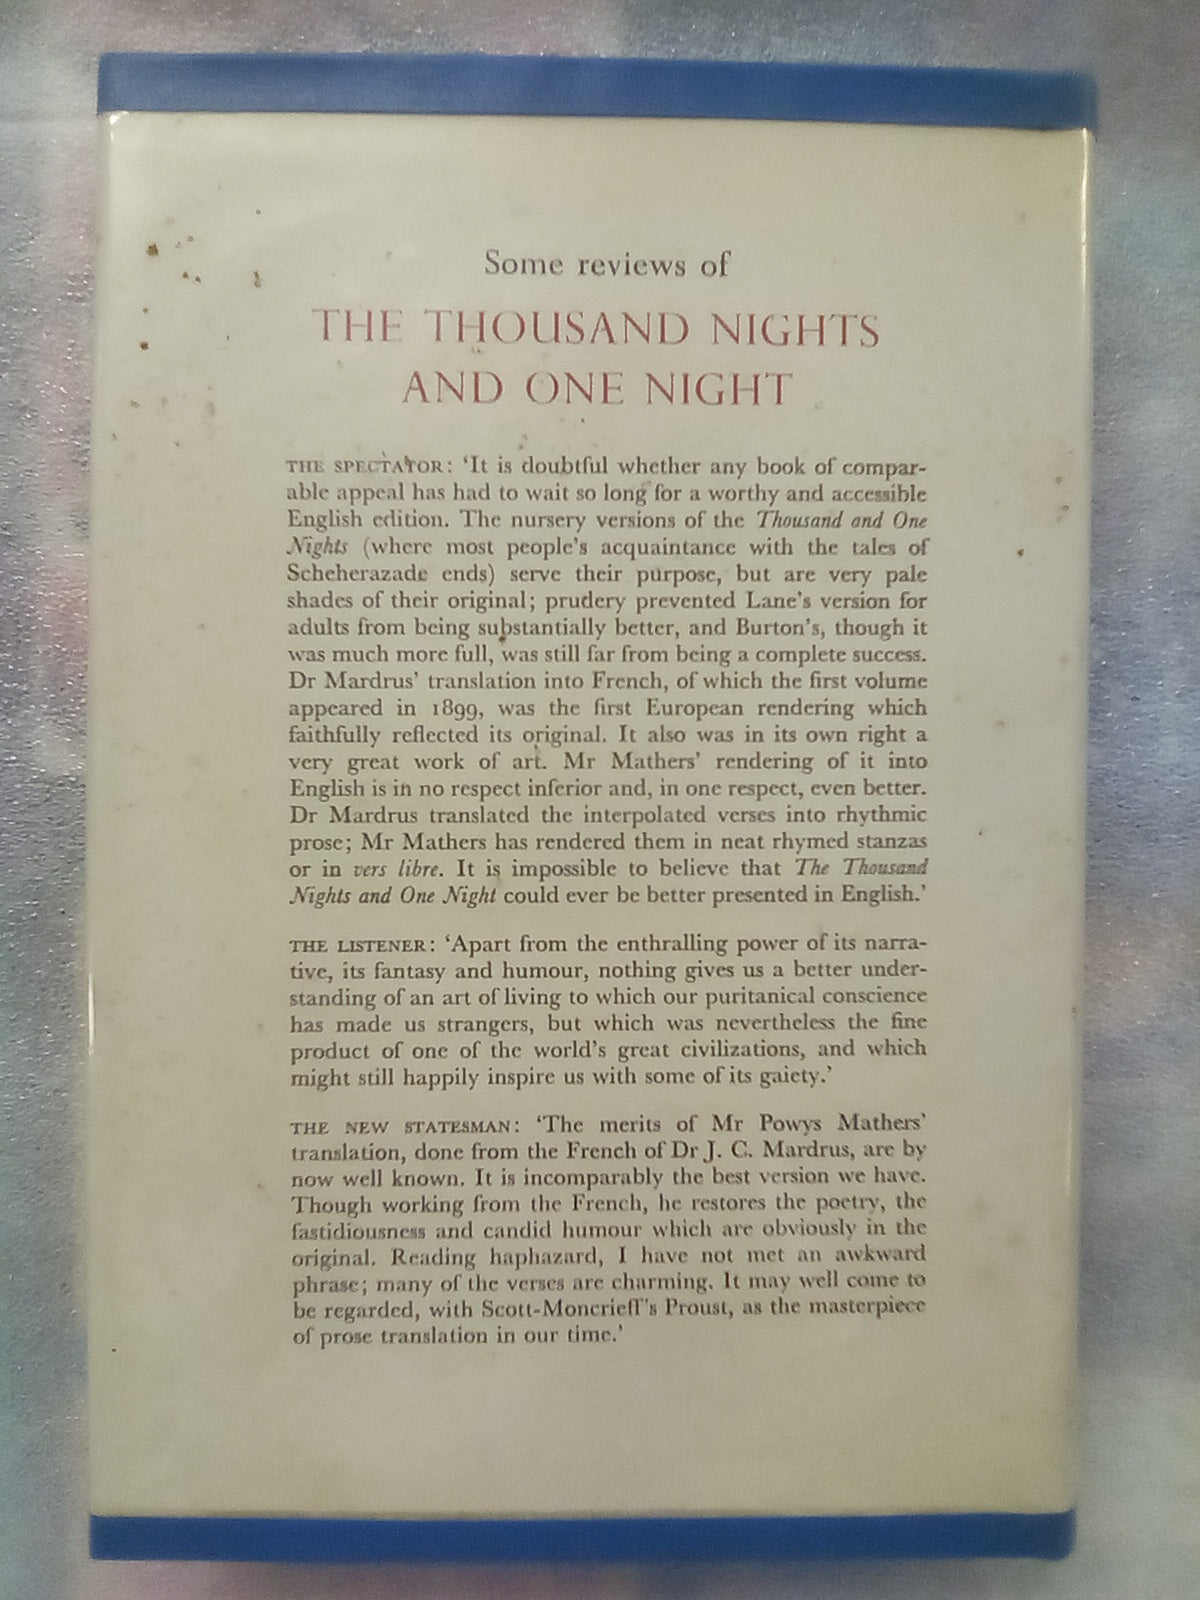 The Book of The Thousand Nights & One Night - 4 Volumes (1964)